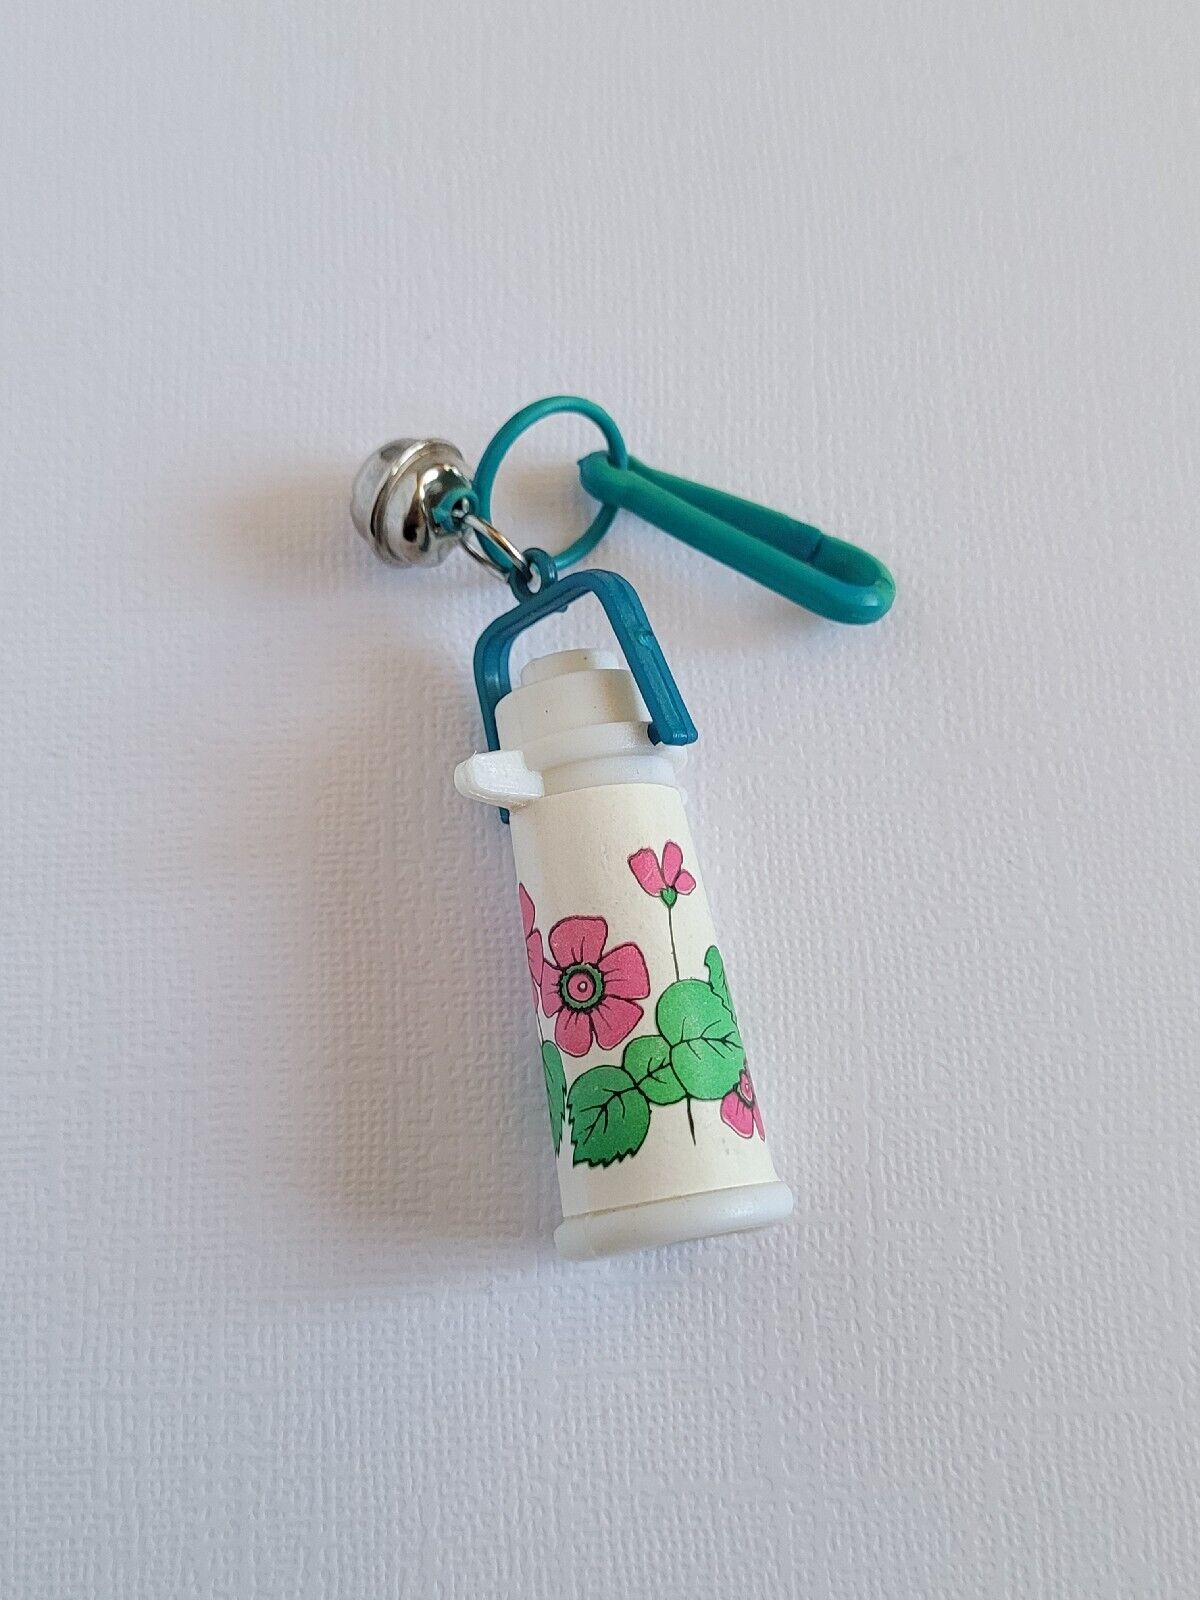 Vintage 1980s Clip On Bell Charms Plastic Beverage Thermos Dispenser Charm